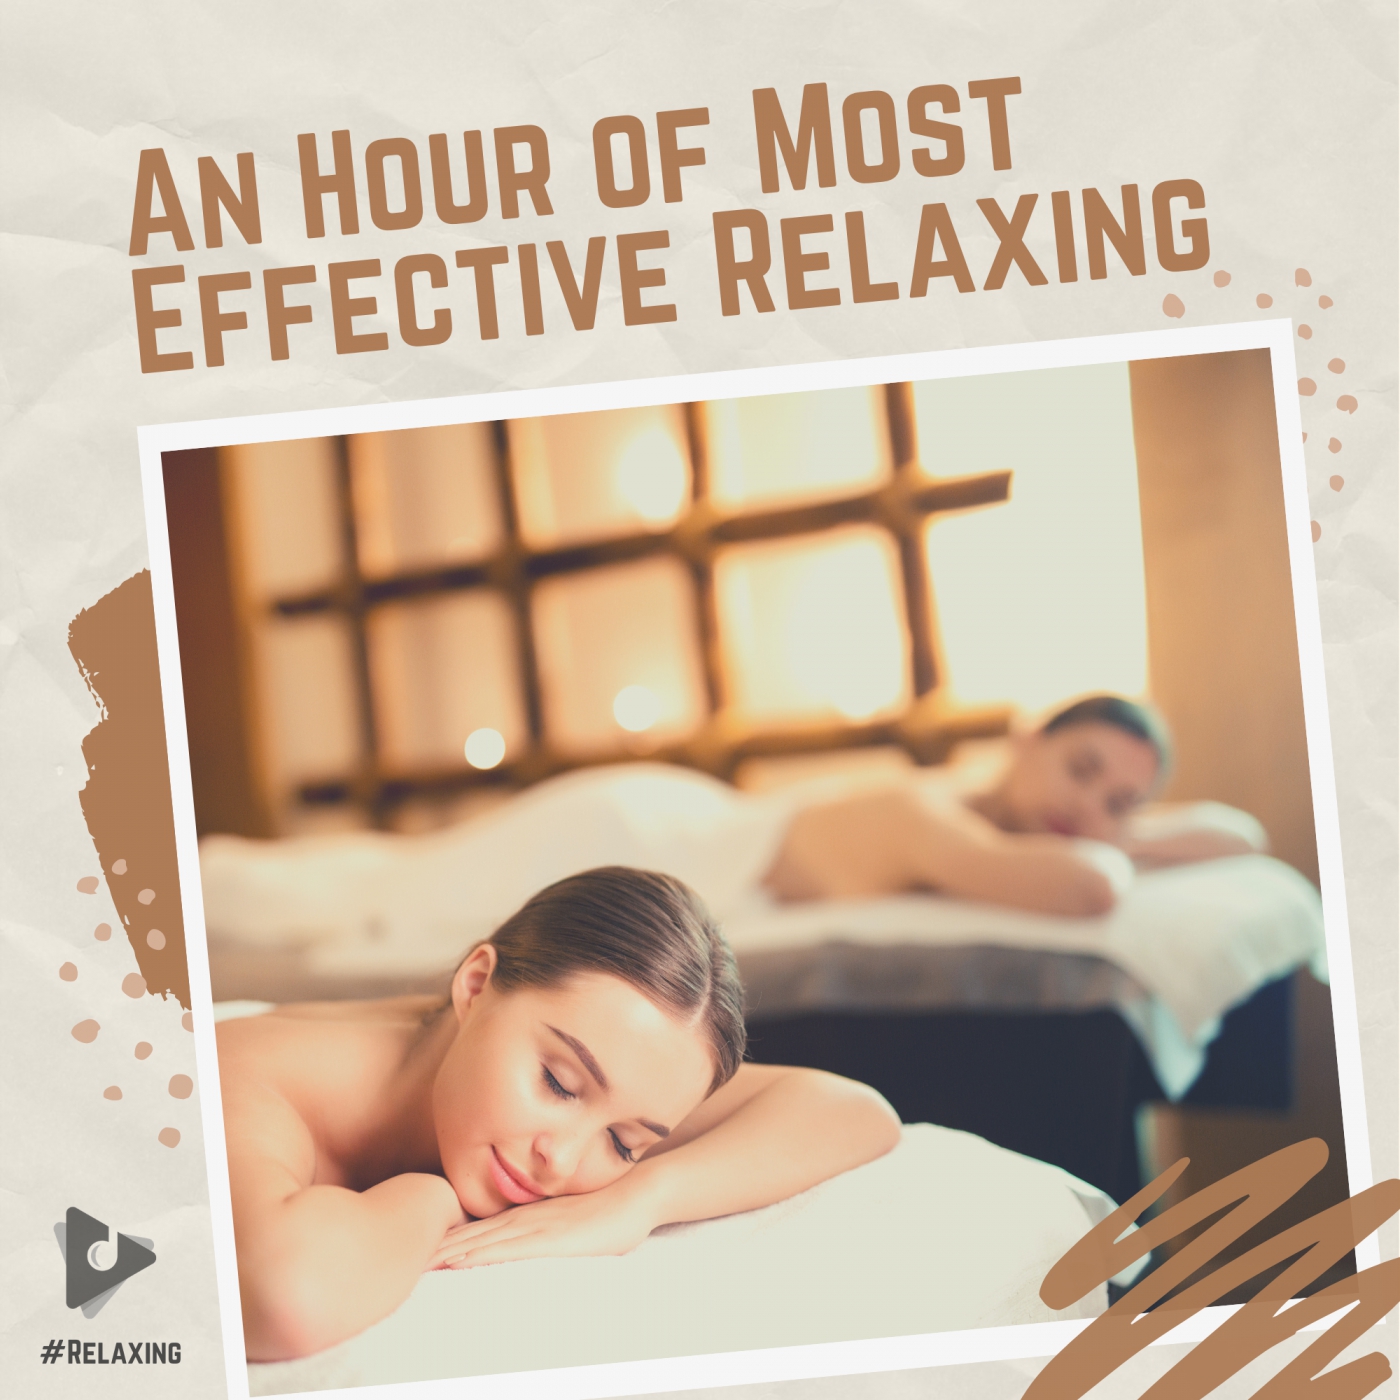 An Hour of Most Effective Relaxing